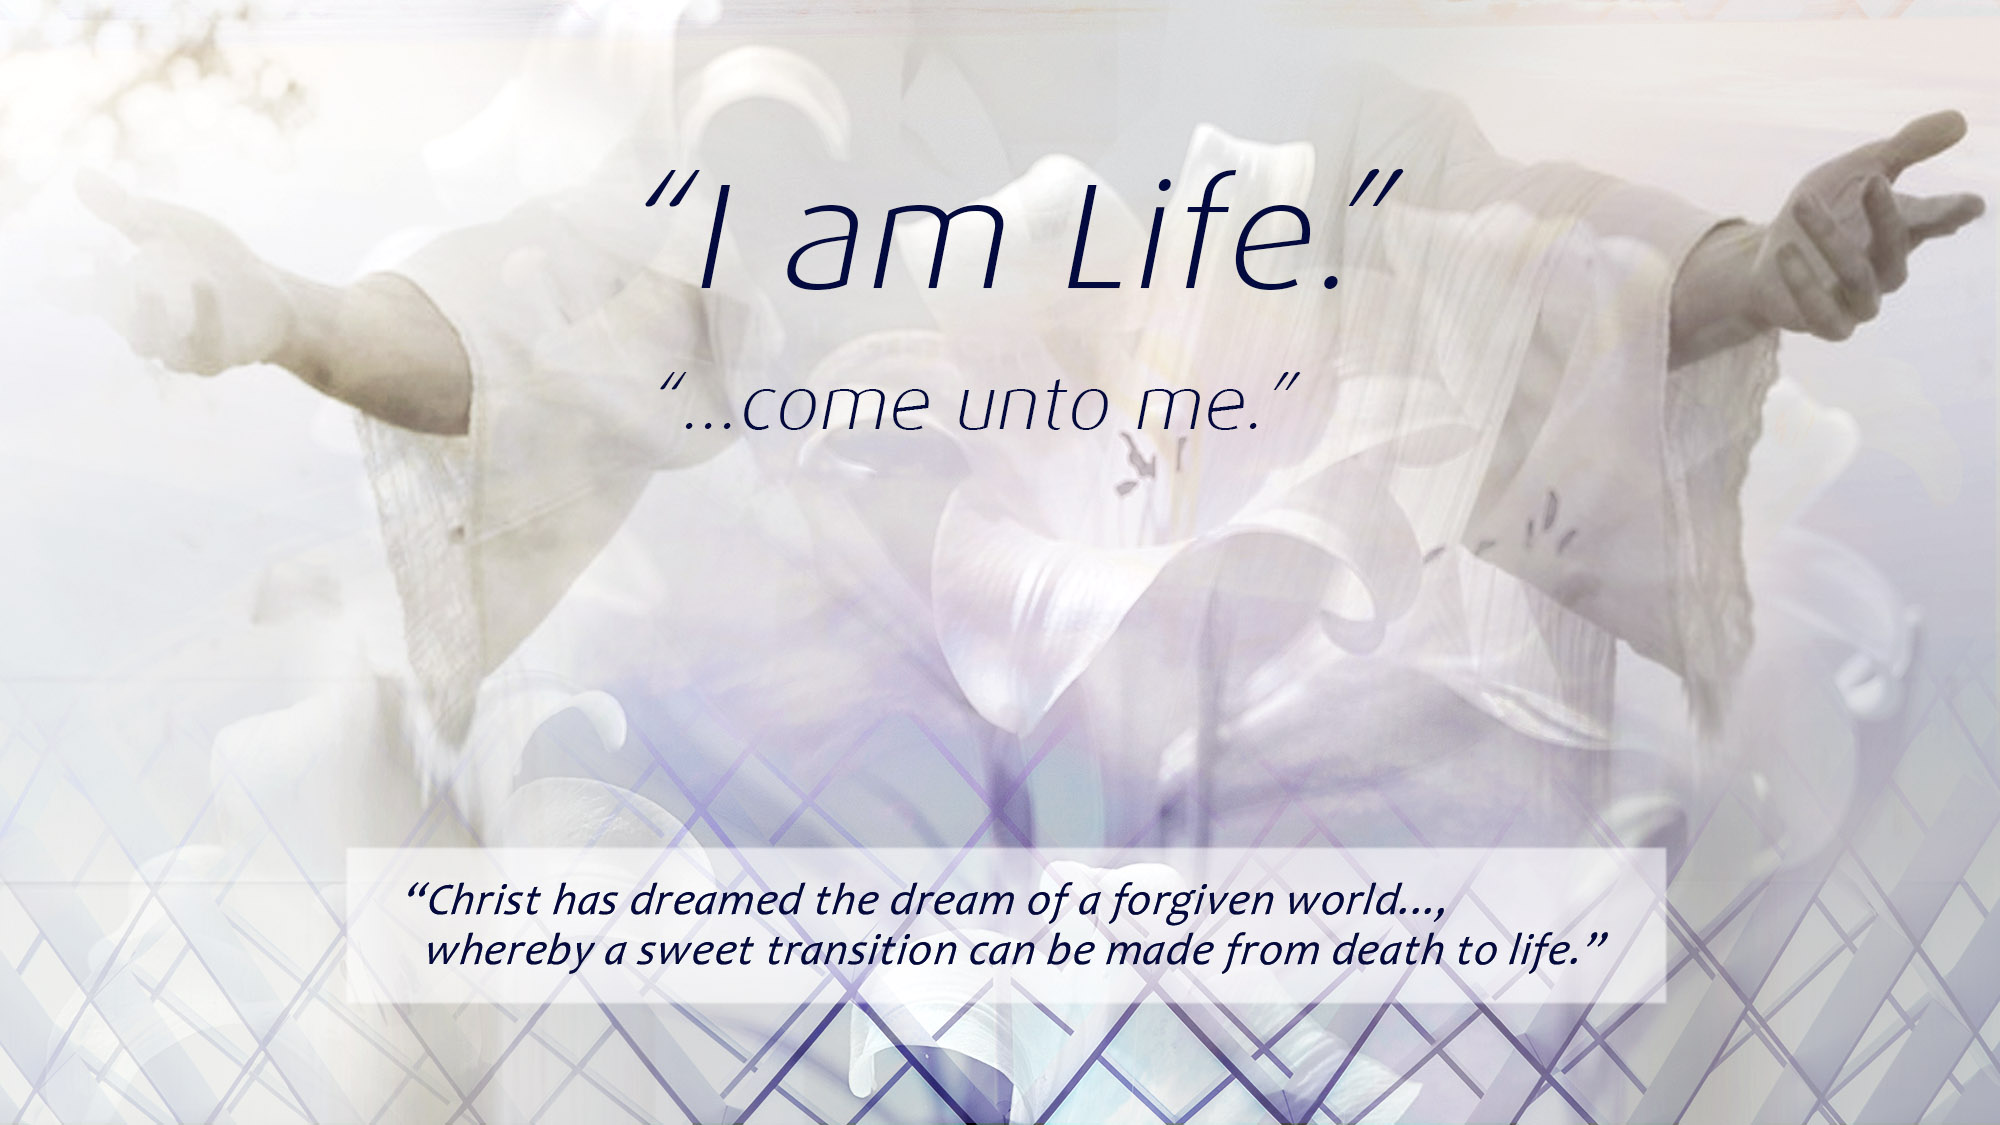 Christ has dreamed the dream of a forgiven world...